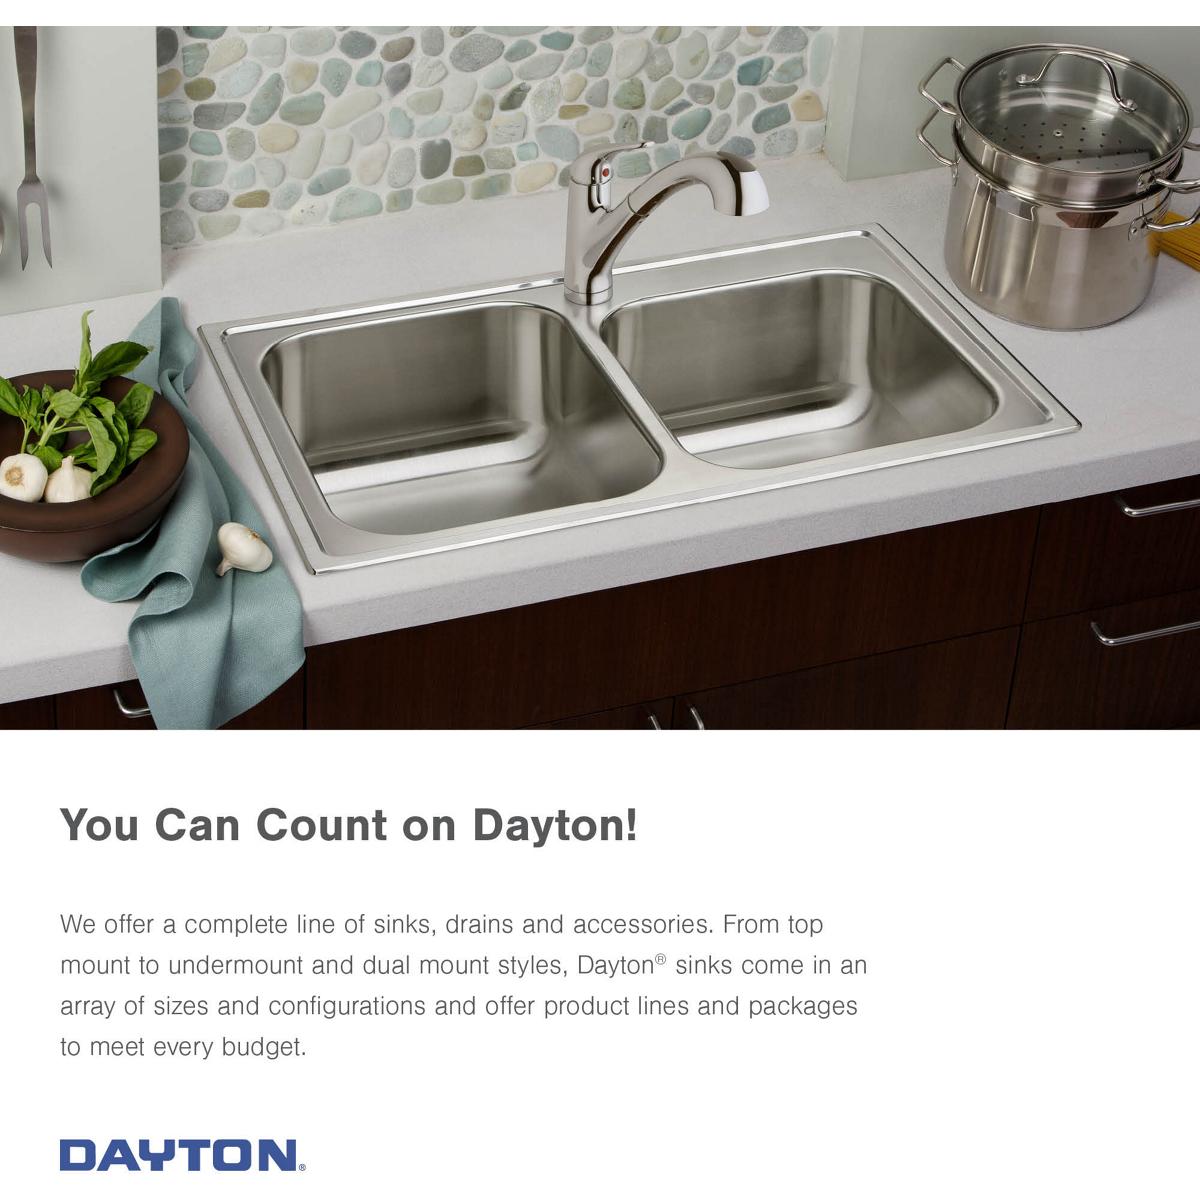 Elkay Dayton Stainless Steel 33" x 22" x 7-1/16" Equal Double Bowl Drop-in Sink and Faucet Kit